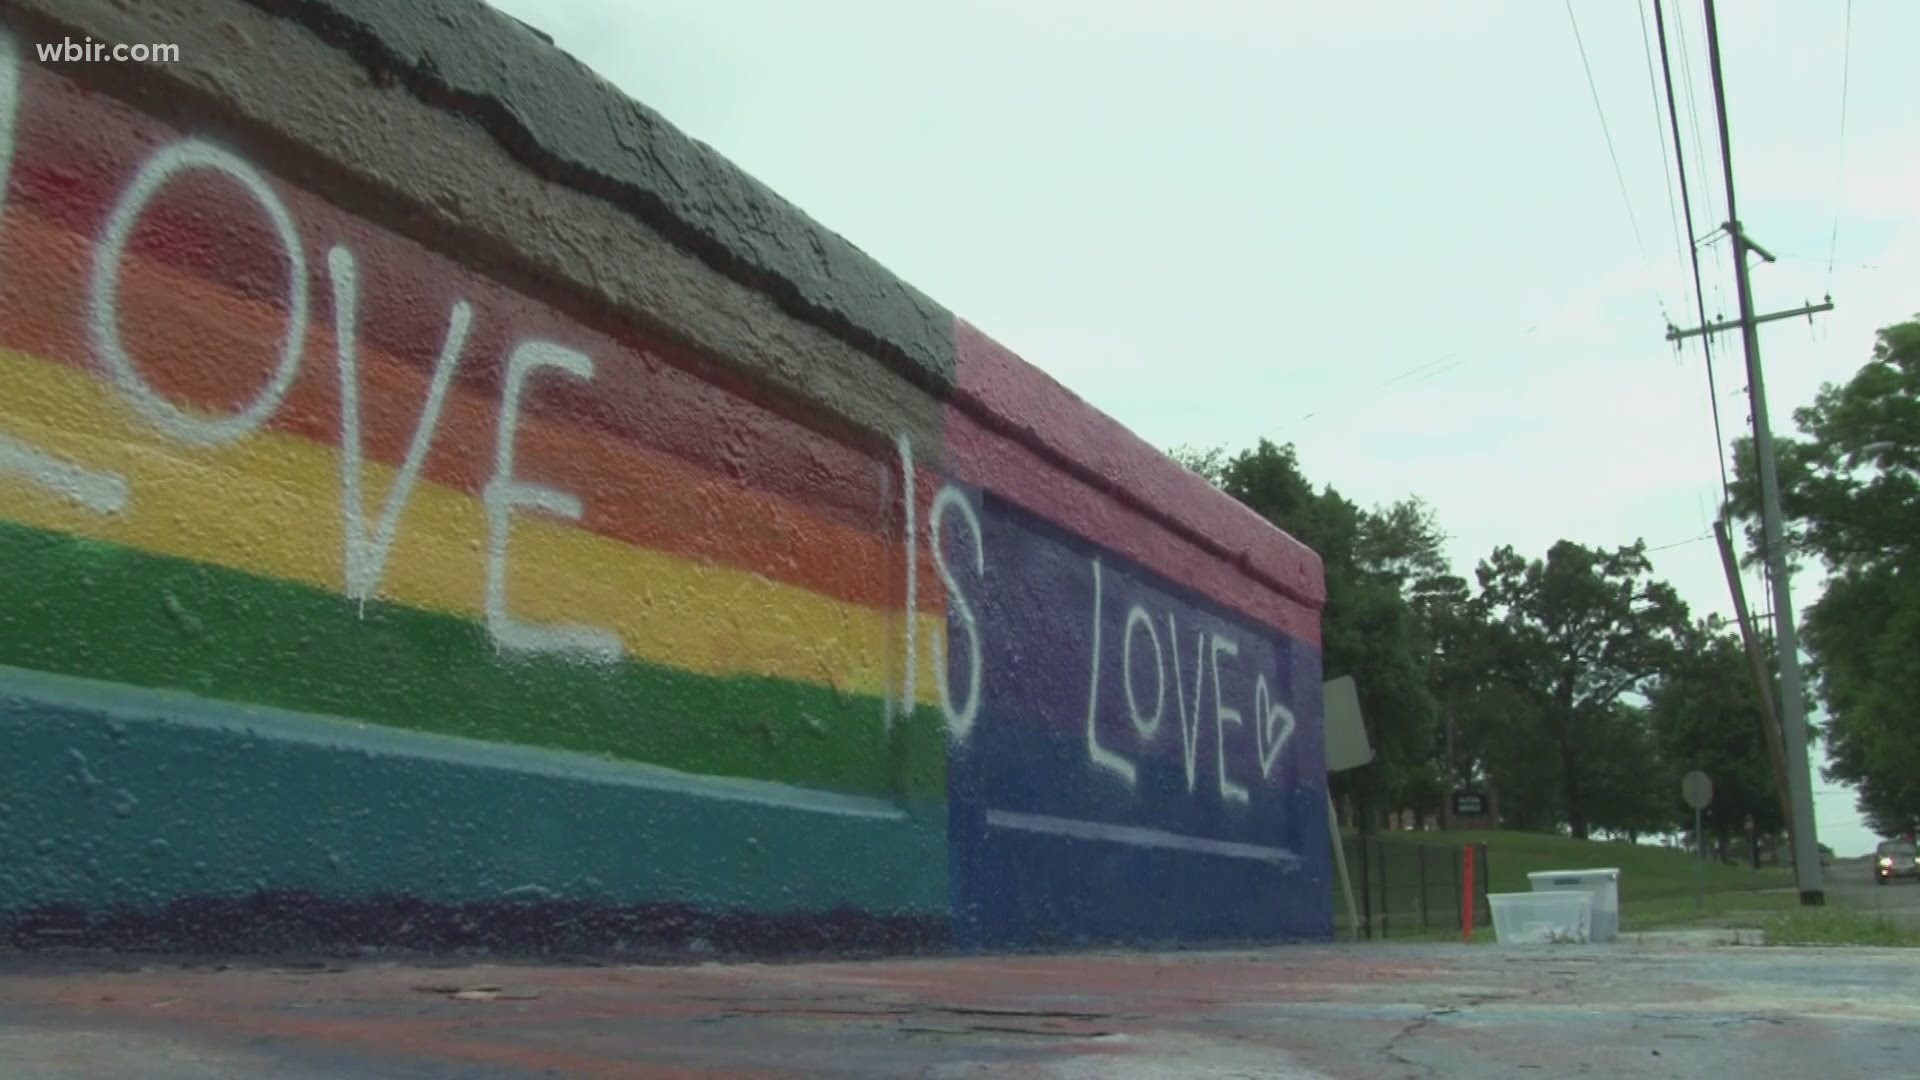 Police said hateful slurs were left on a bridge known for community art after two teens painted Pride flags on it. City crews cleared the slurs Friday morning.